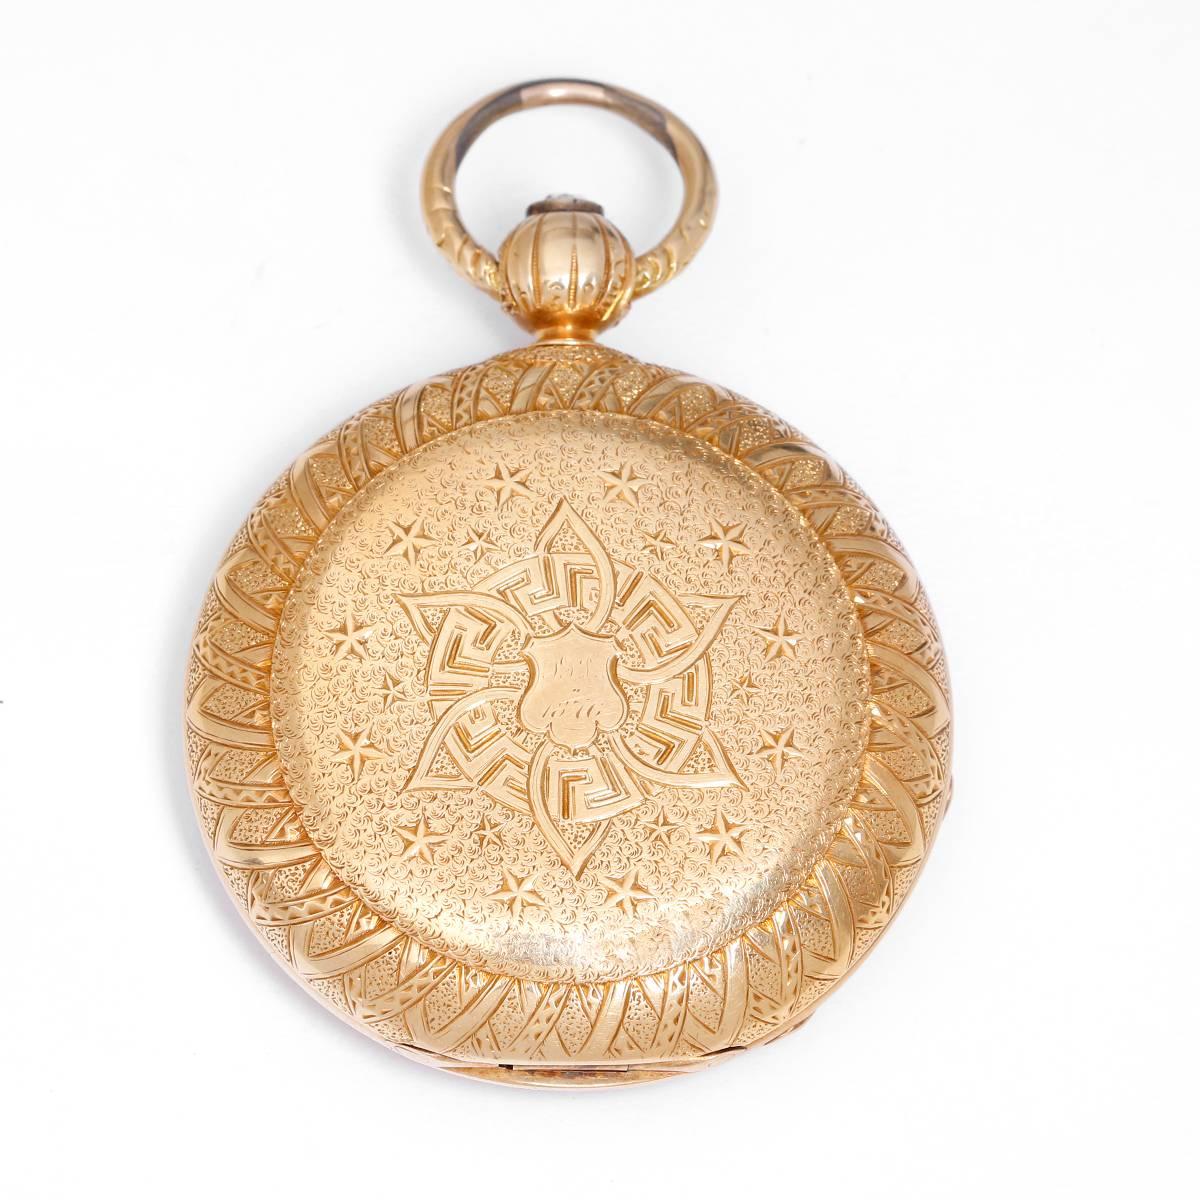 F. H. Clark & Co. Engraved Yellow Gold Pocket Watch 1